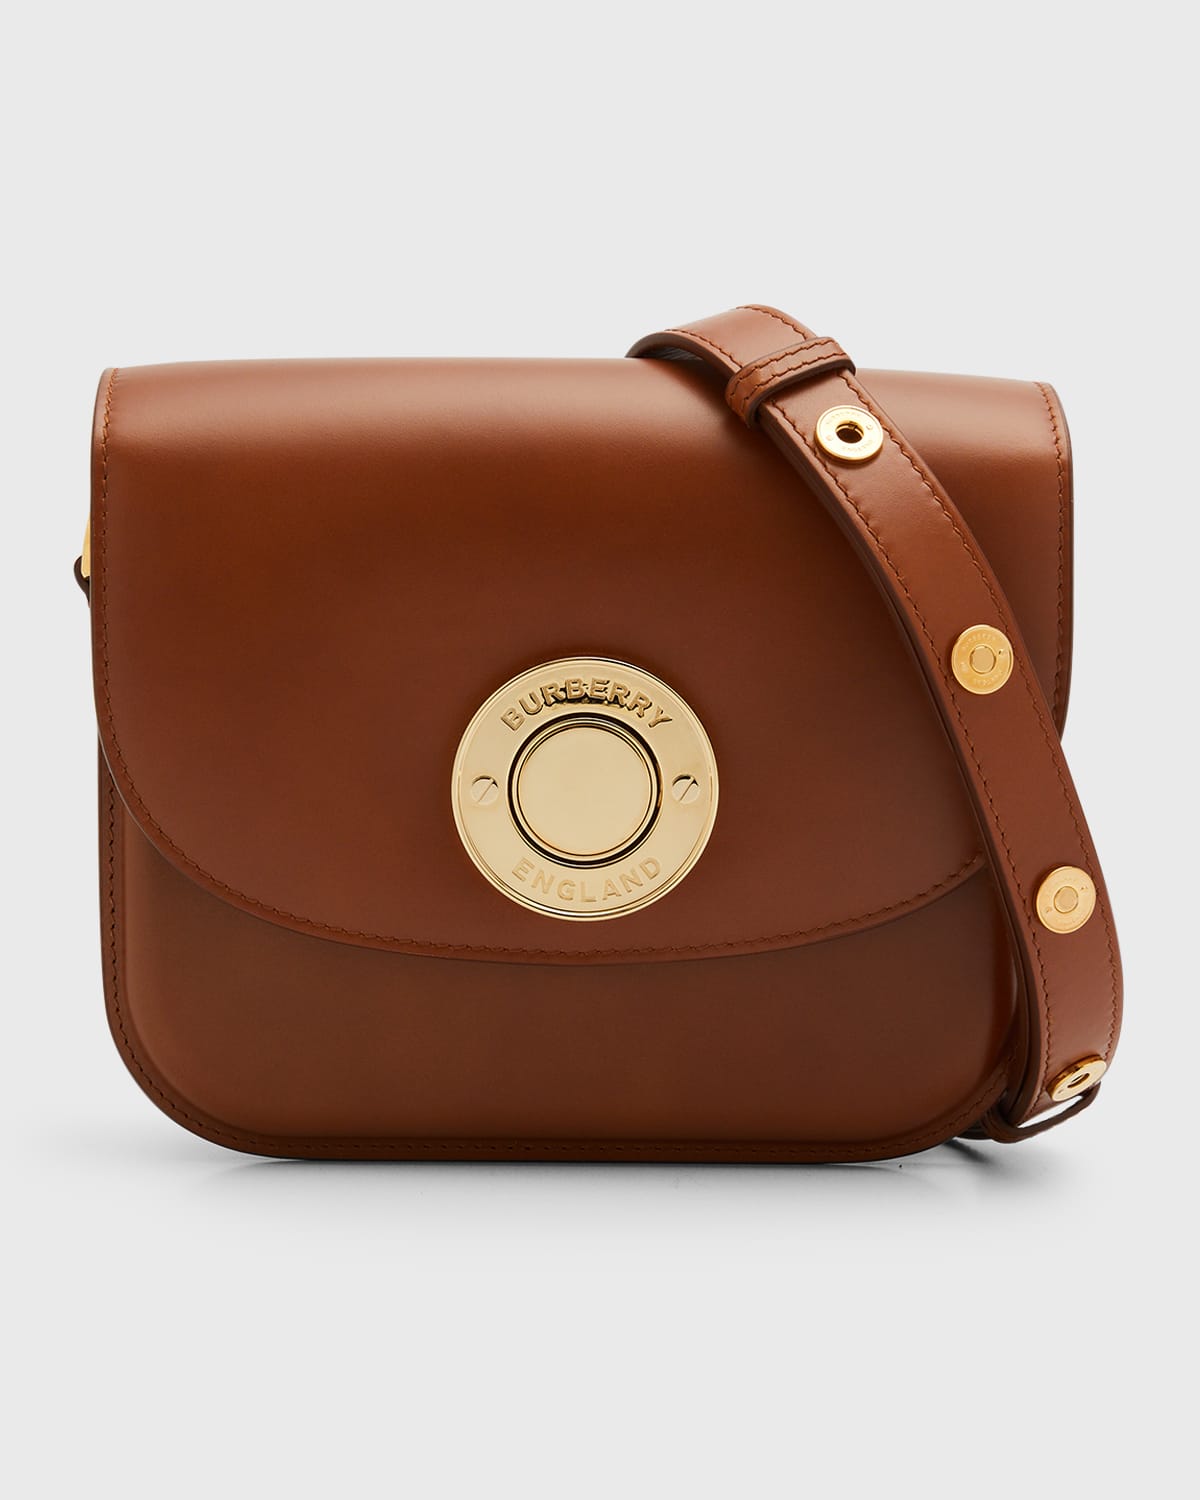 Burberry Note Small Leather Saddle Shoulder Bag